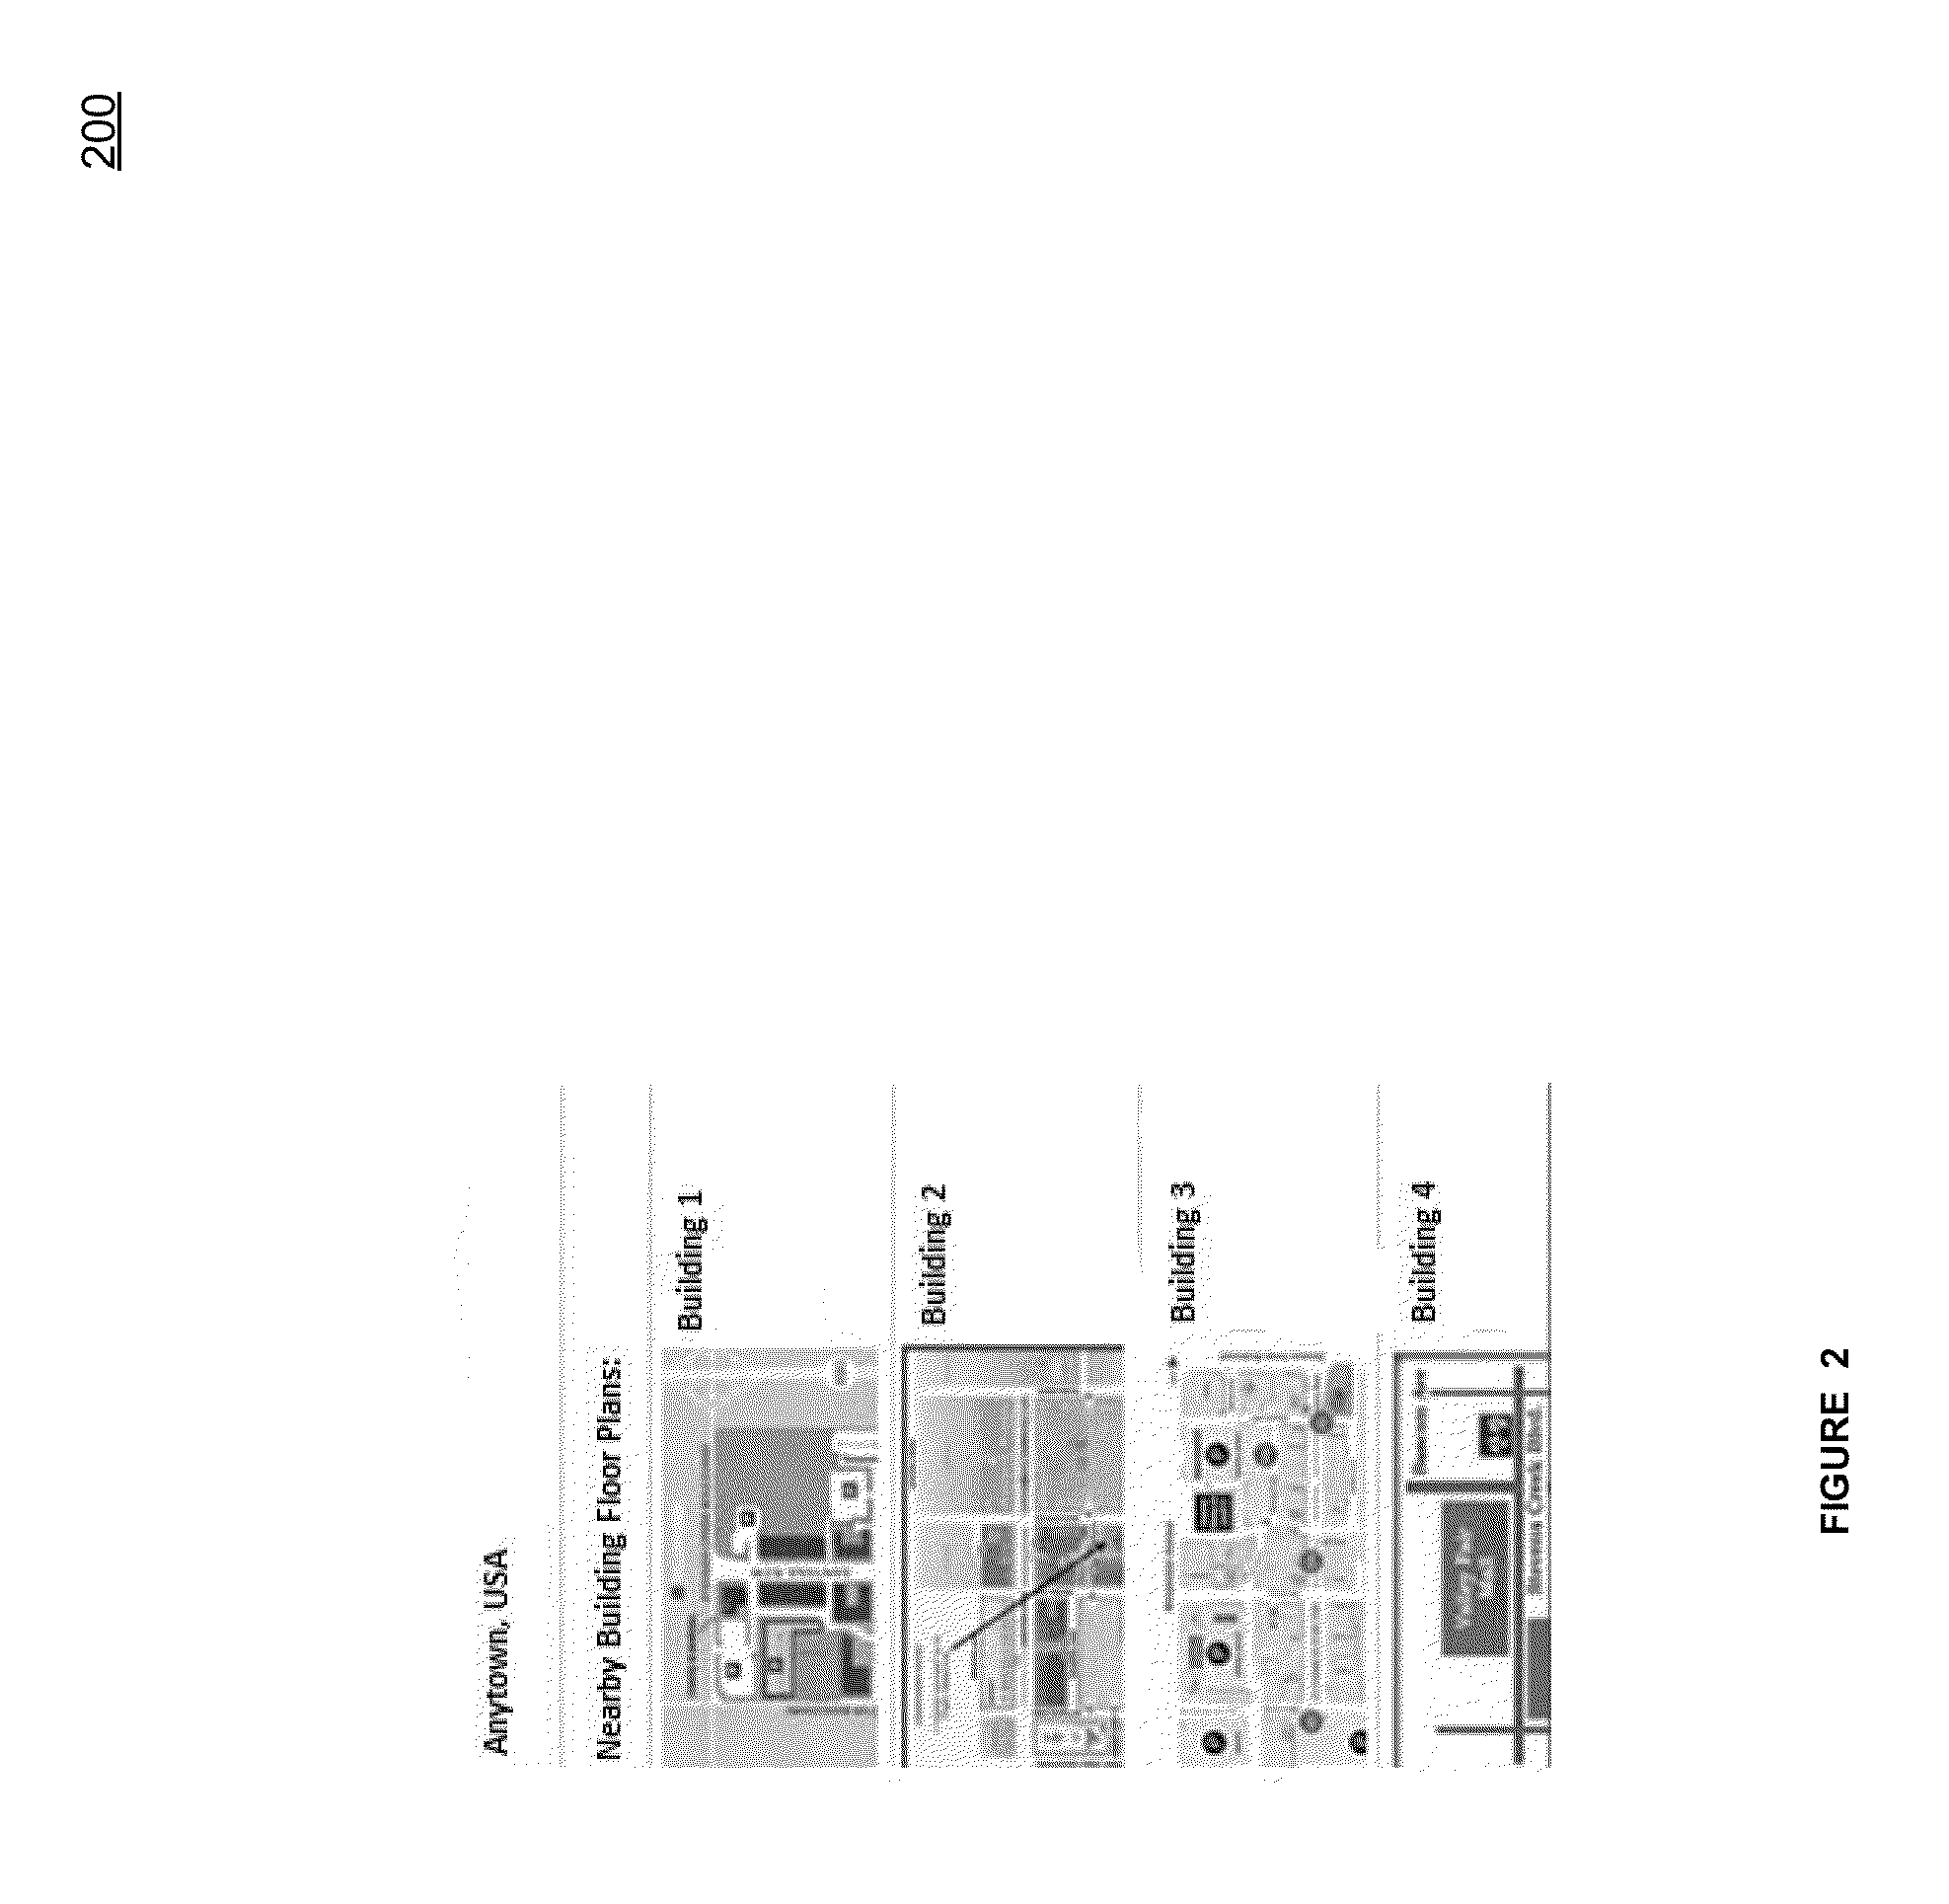 System and method for mapping an indoor environment